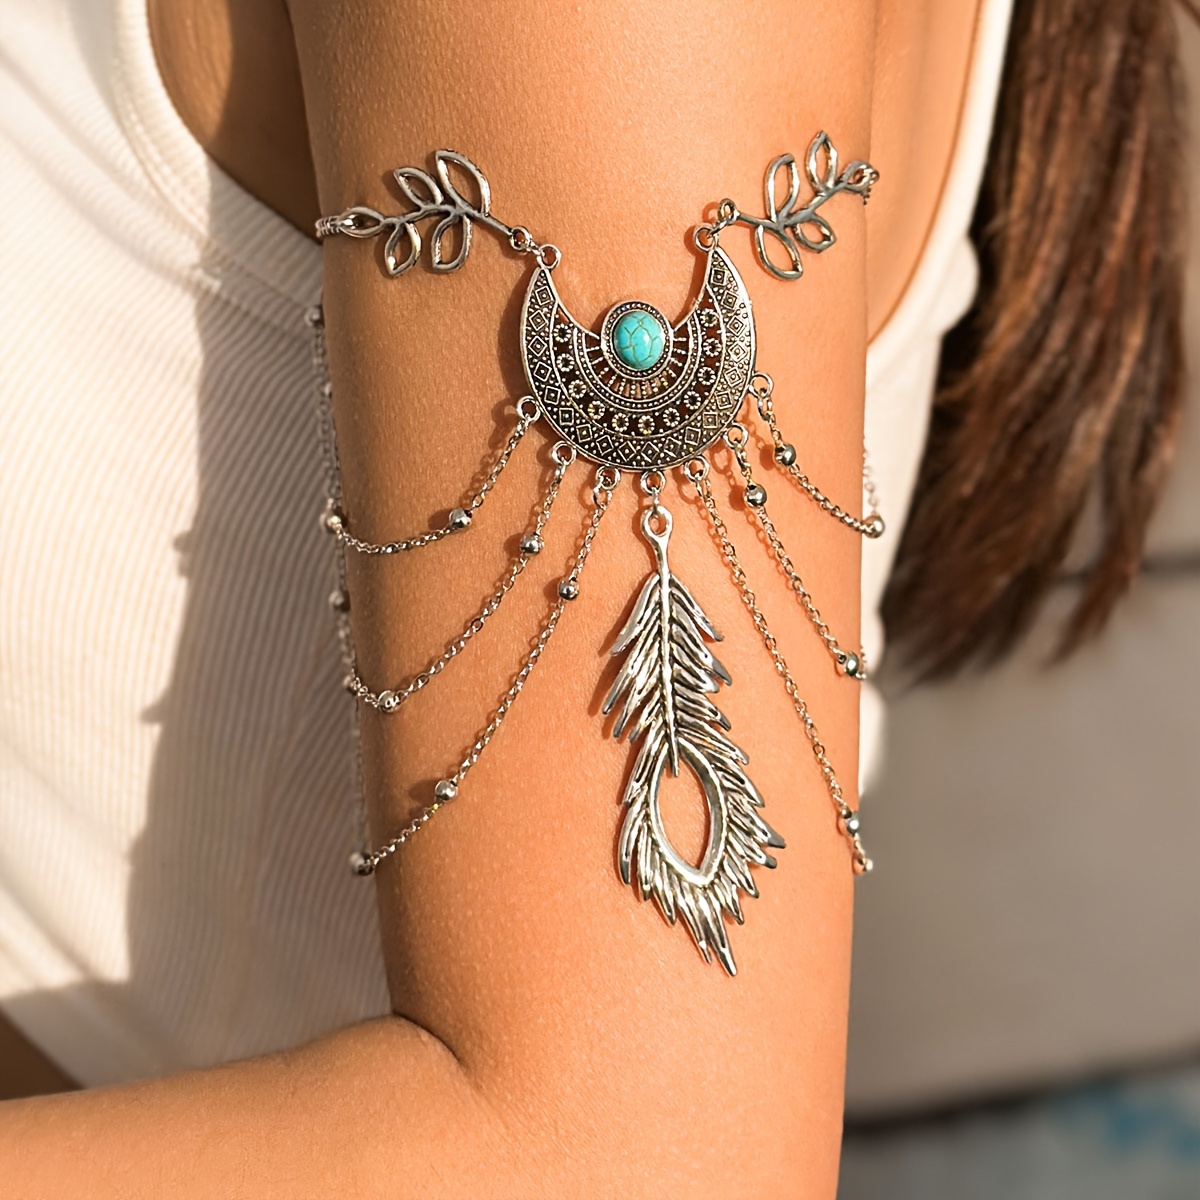 

1pc Bohemian Retro Style, Adjustable Metal Cuff Bracelet Match With Tassel And Turquoise Stone For Women, Vintage Boho Chic Armlet Jewelry For Vacation Accessory